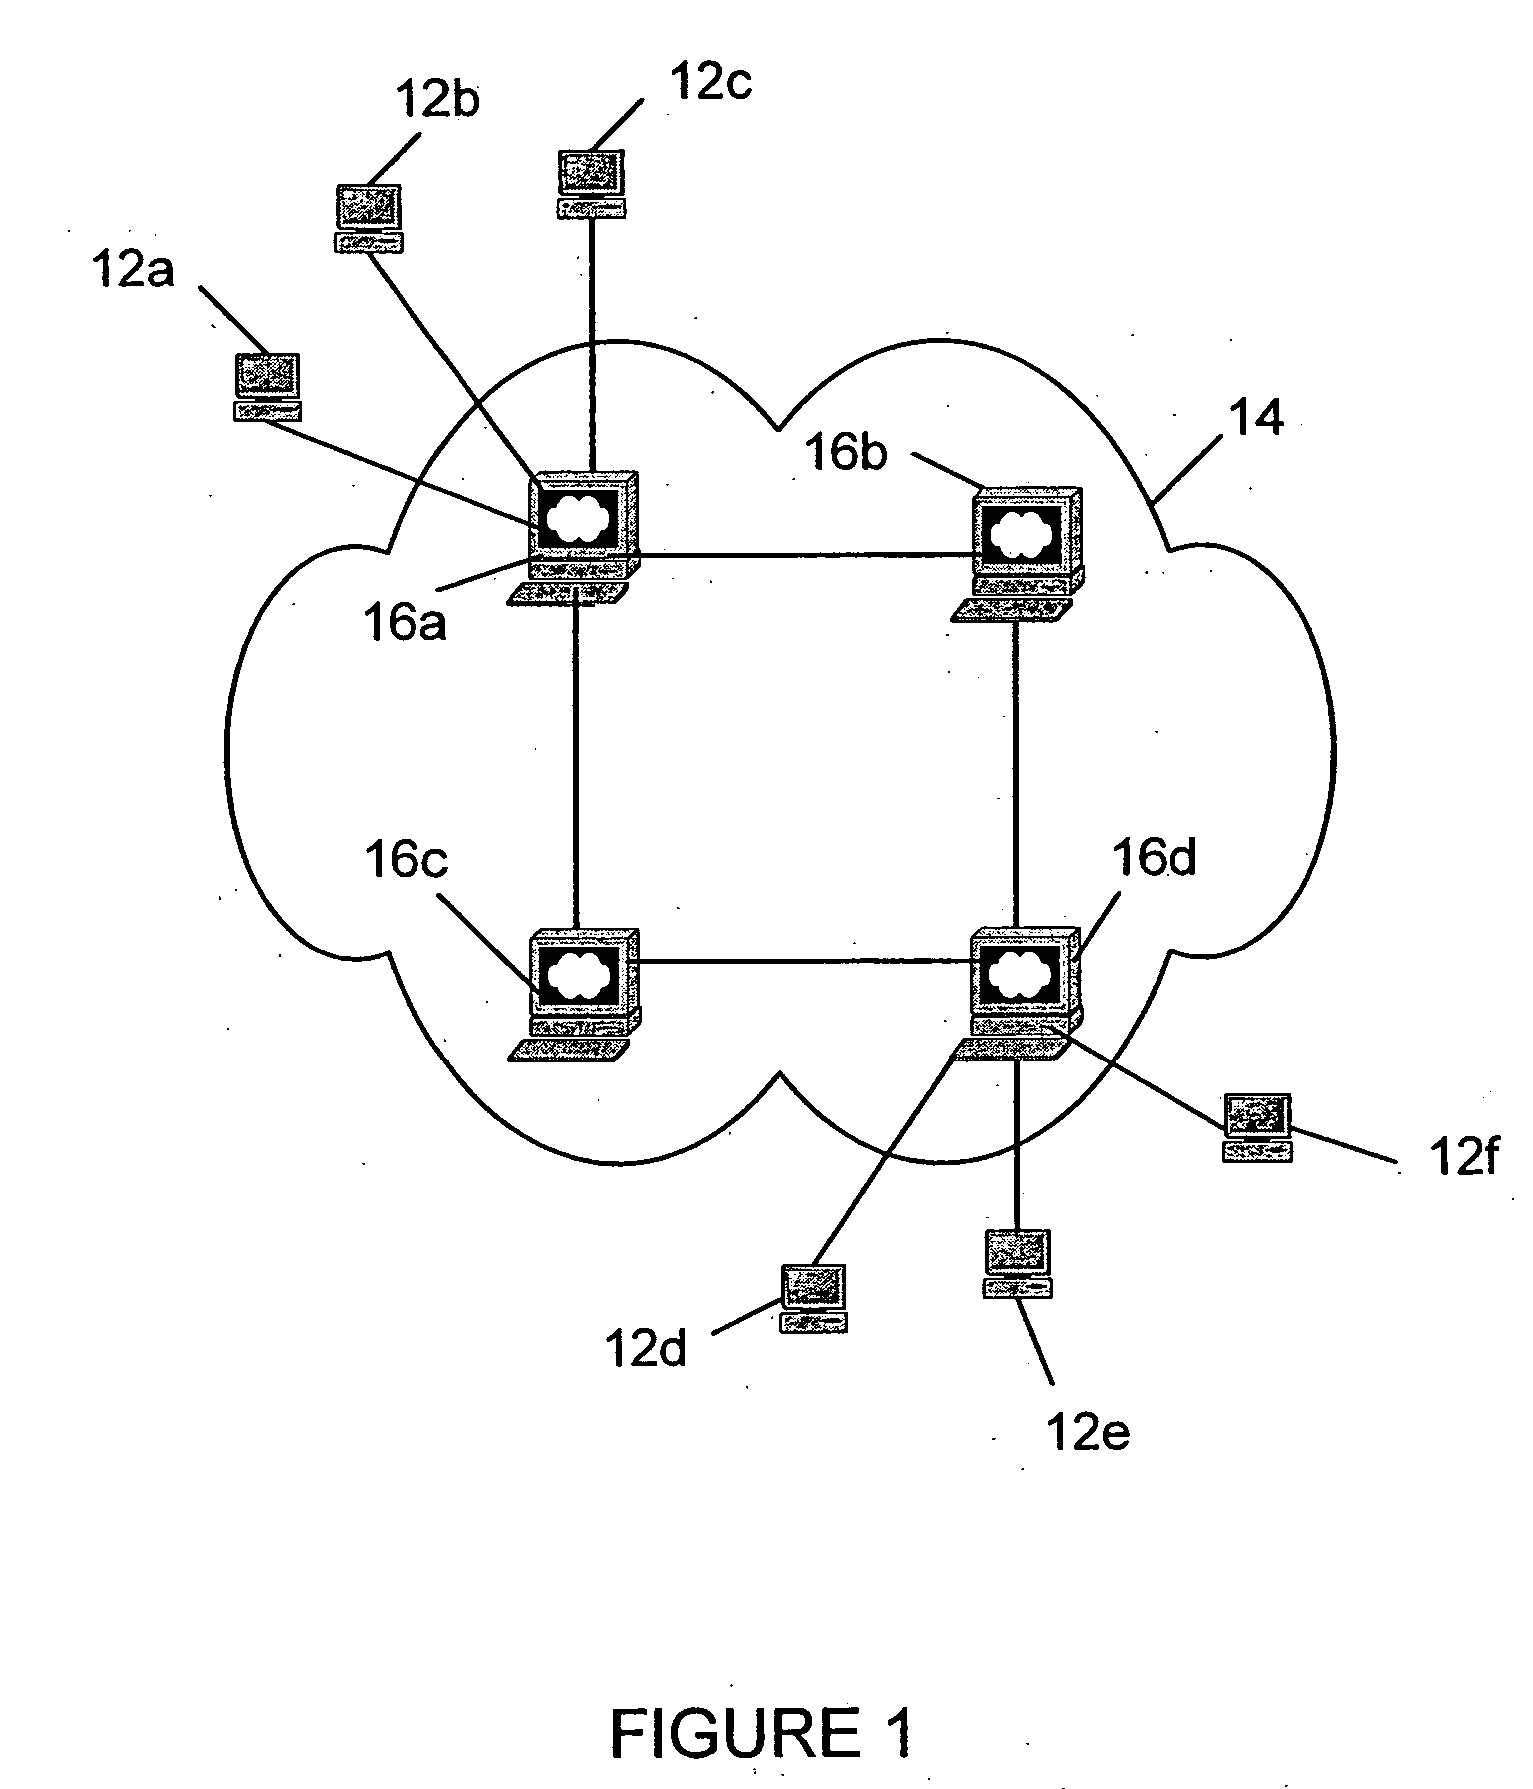 Method and apparatus for geolocation of a network user